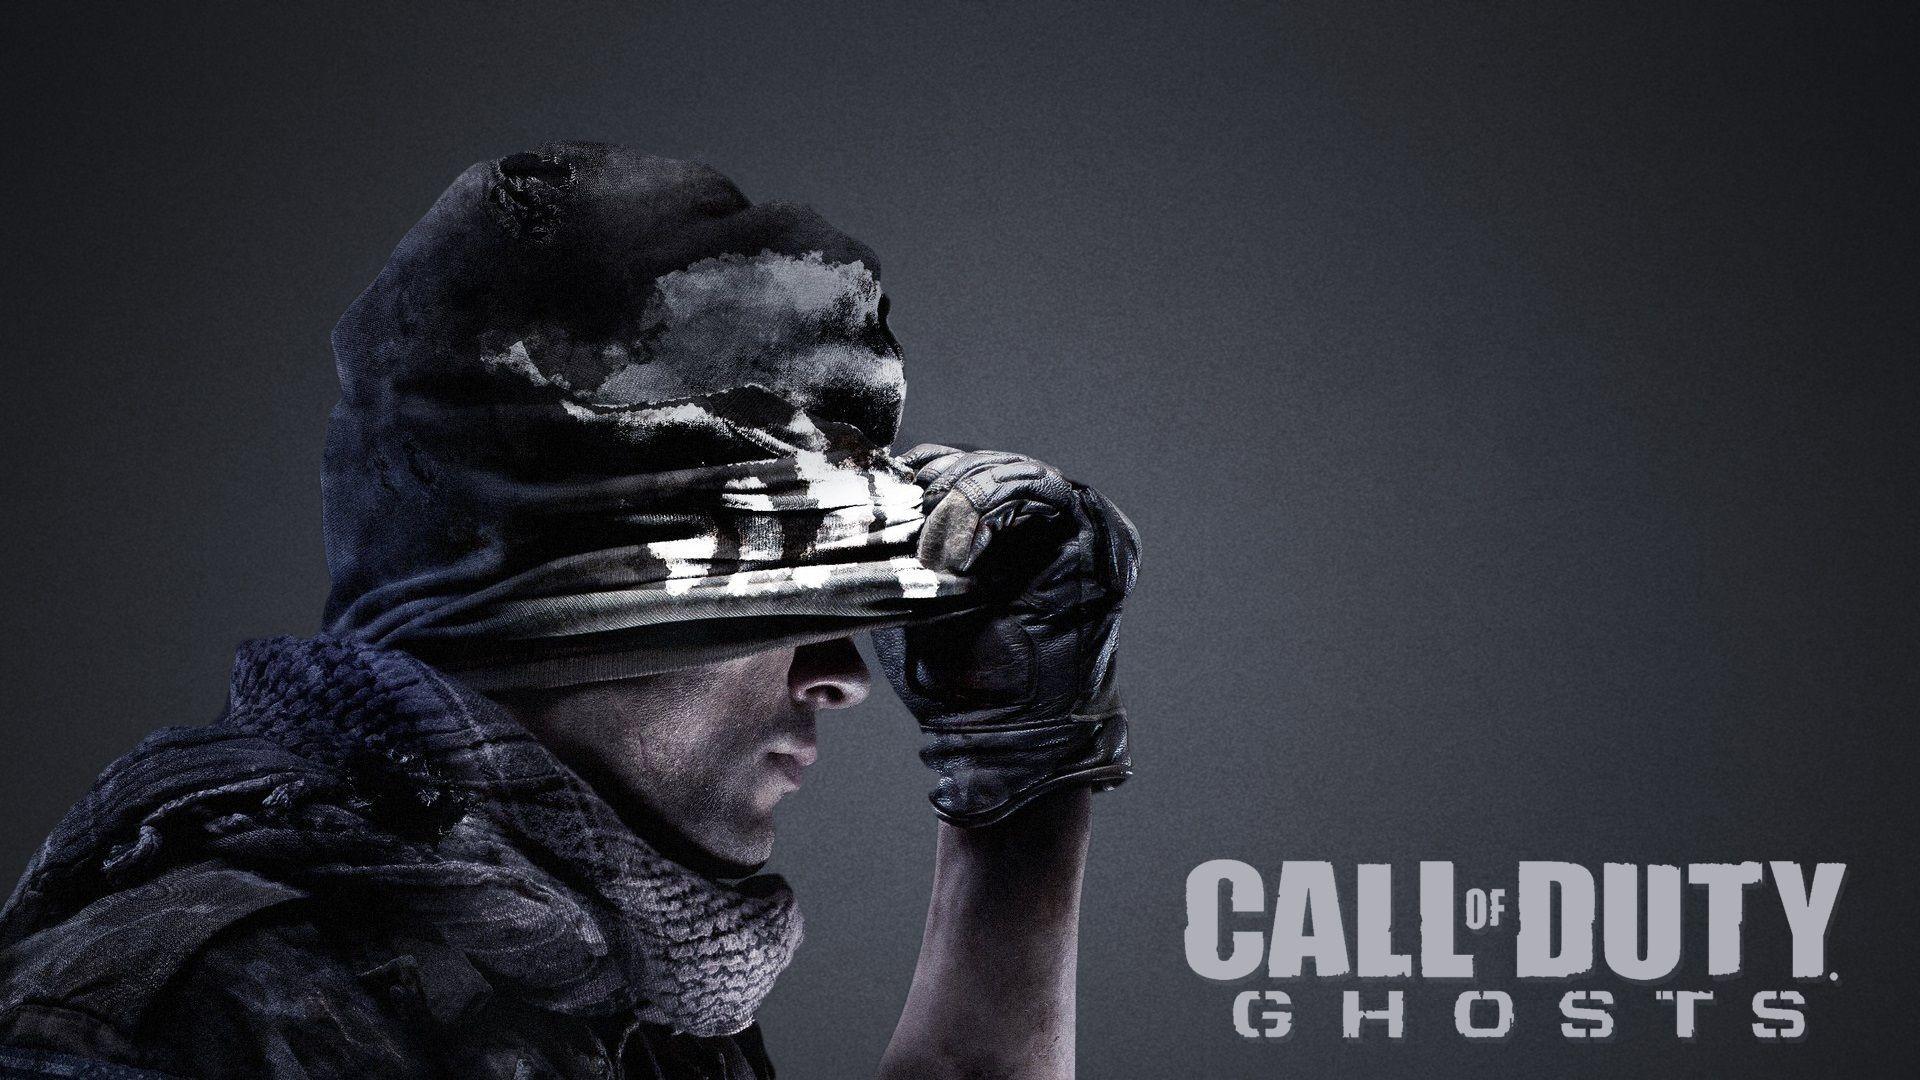 Wallpaper Wallpaper from Call of Duty: Ghosts